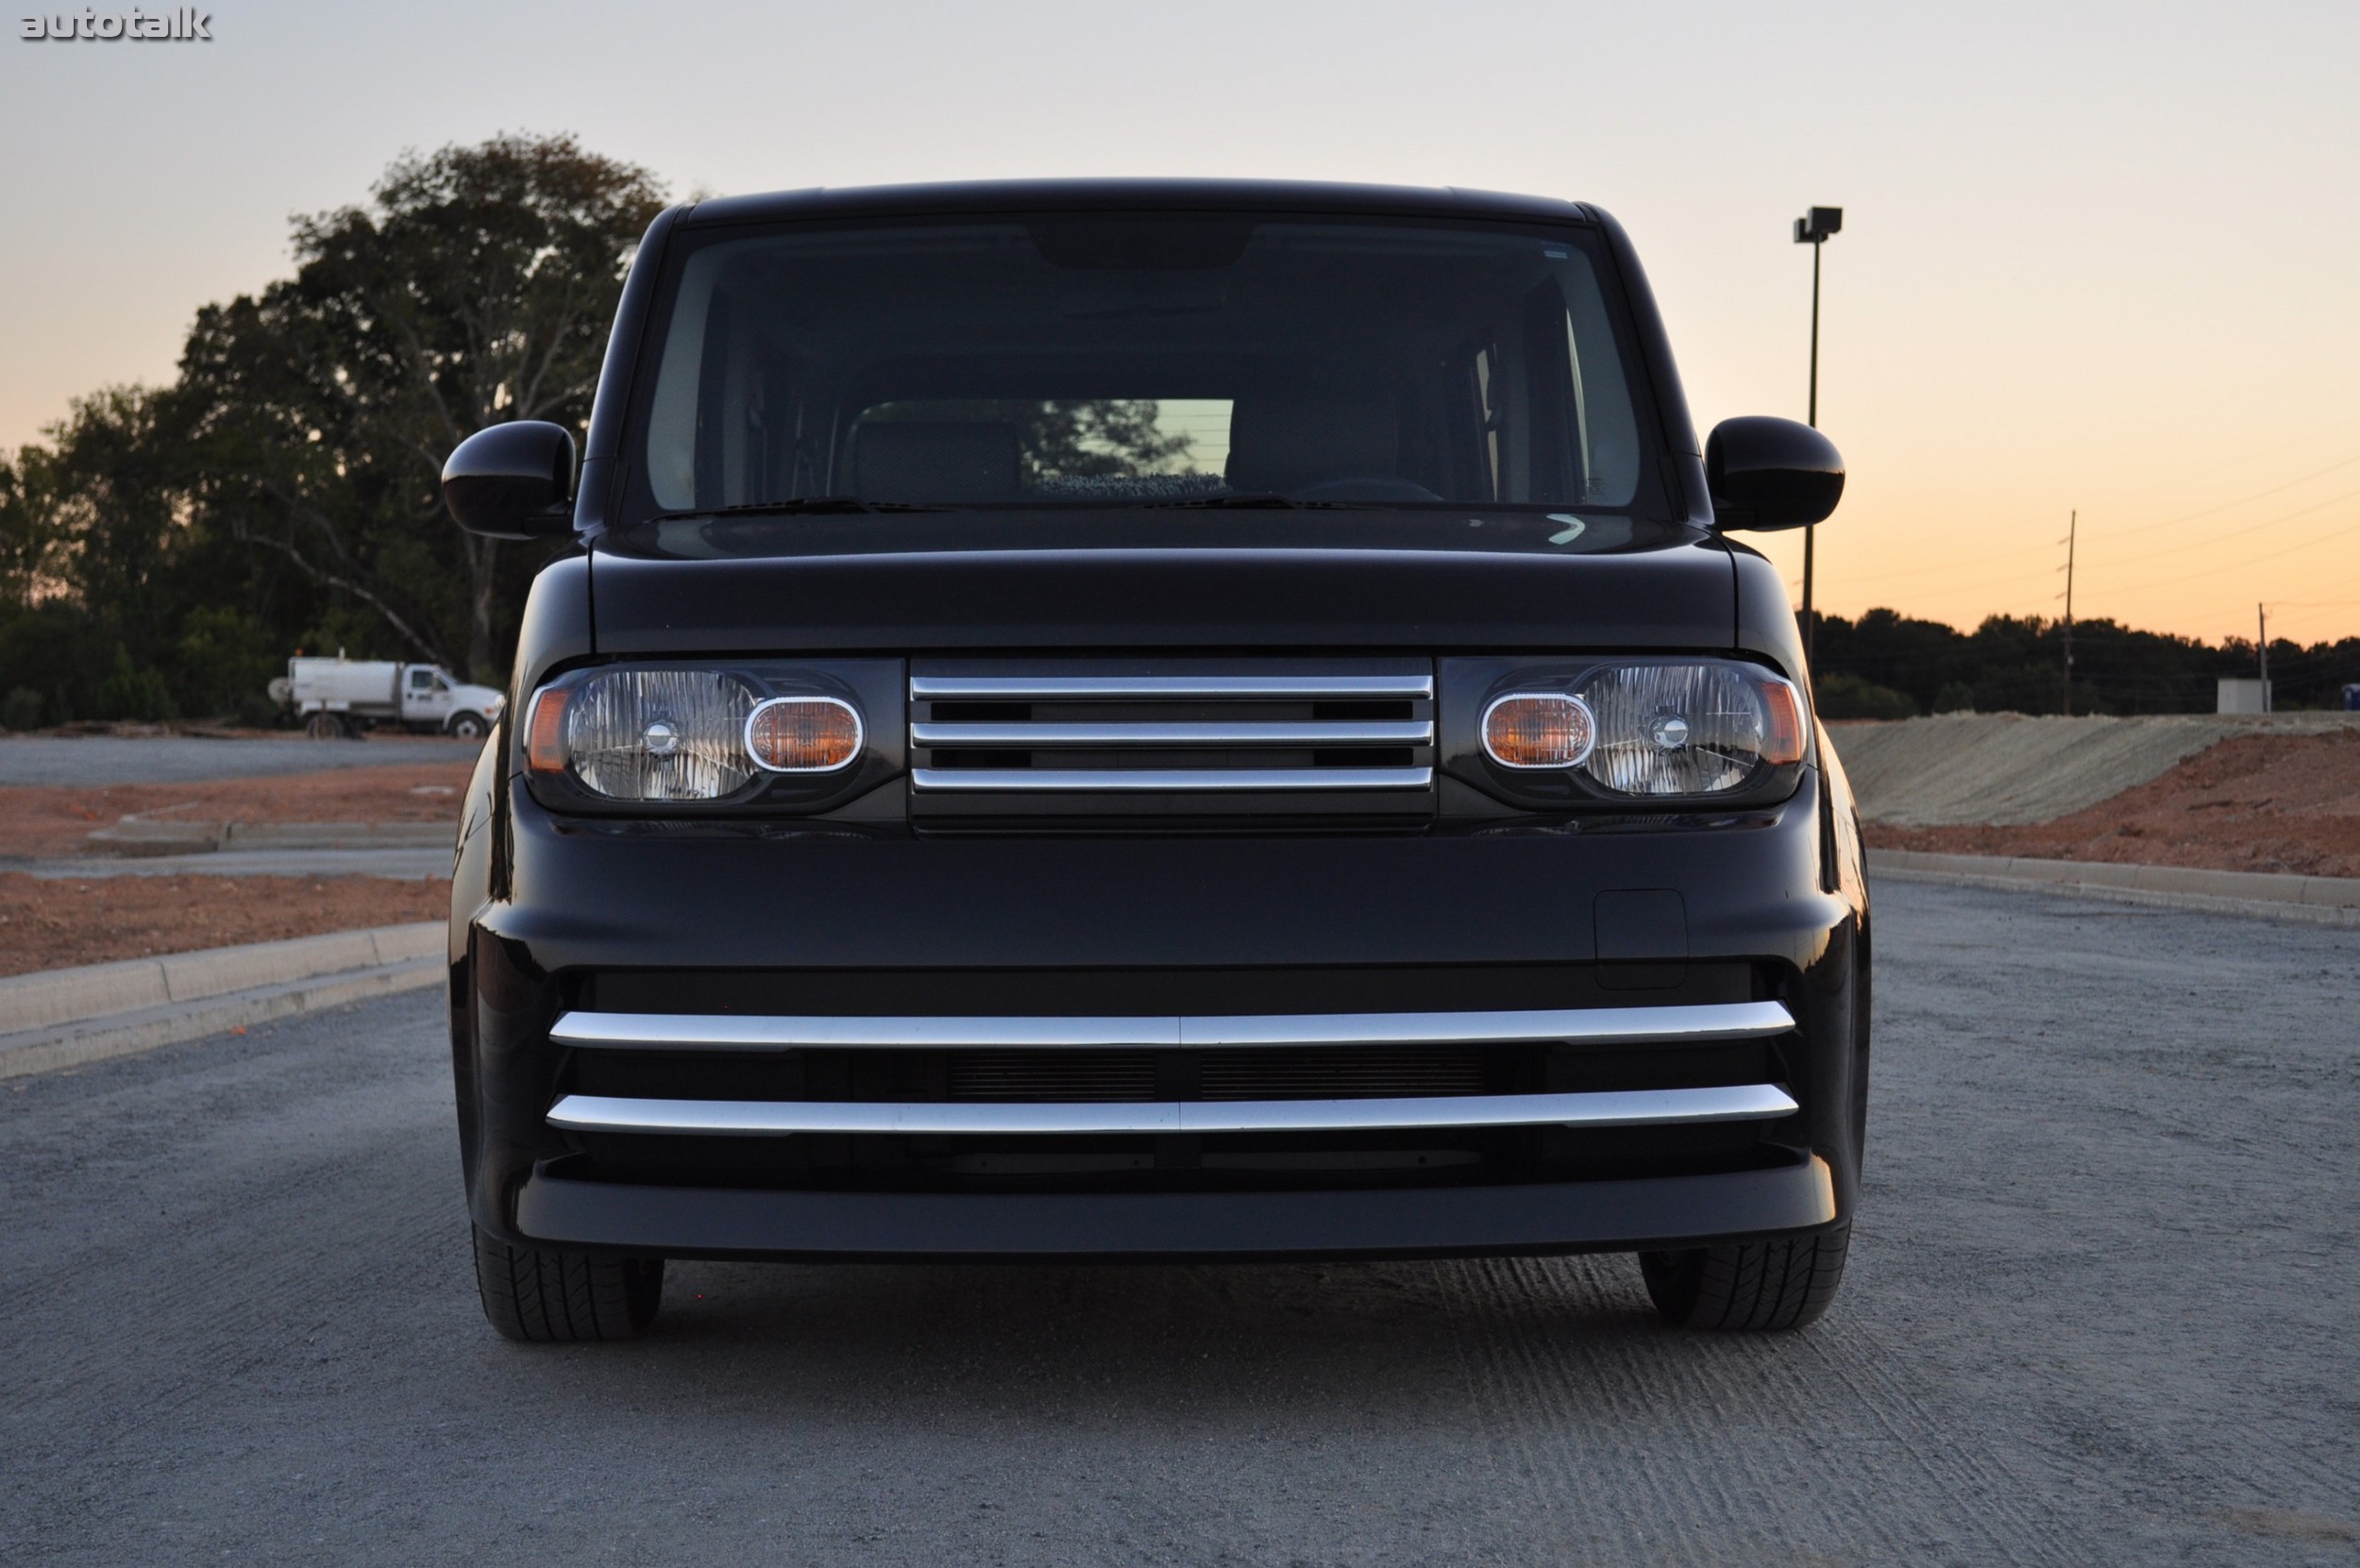 2010 Nissan Cube Krom Review